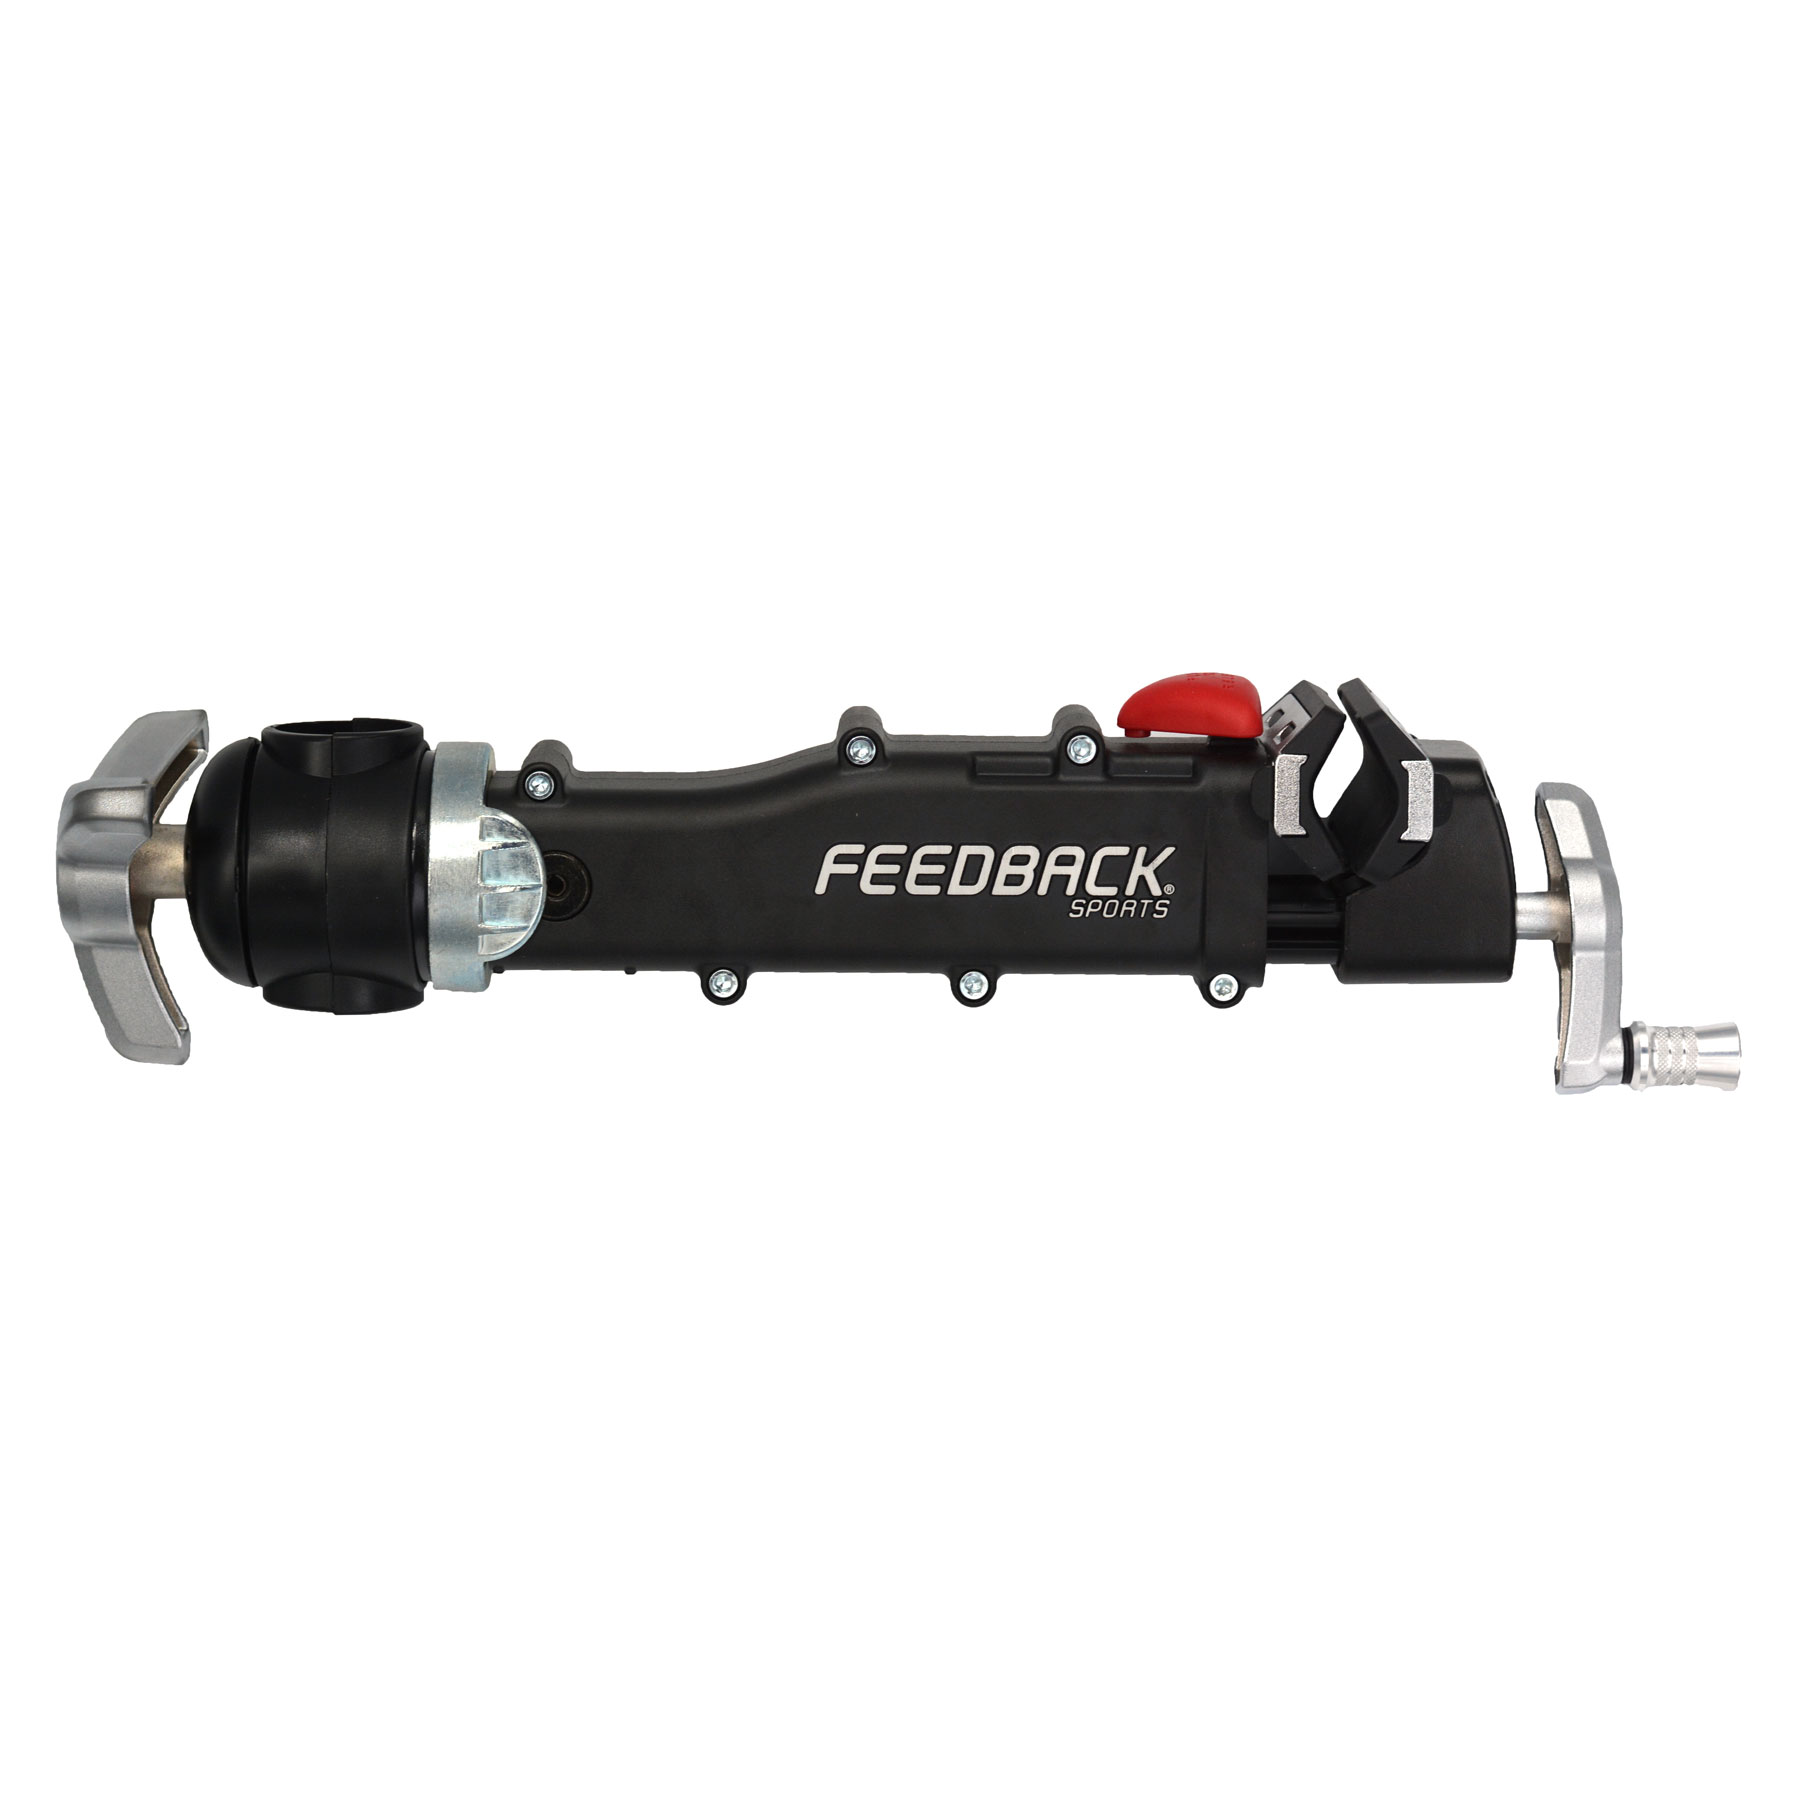 Picture of Feedback Sports Clamp Head for Pro Mechanic